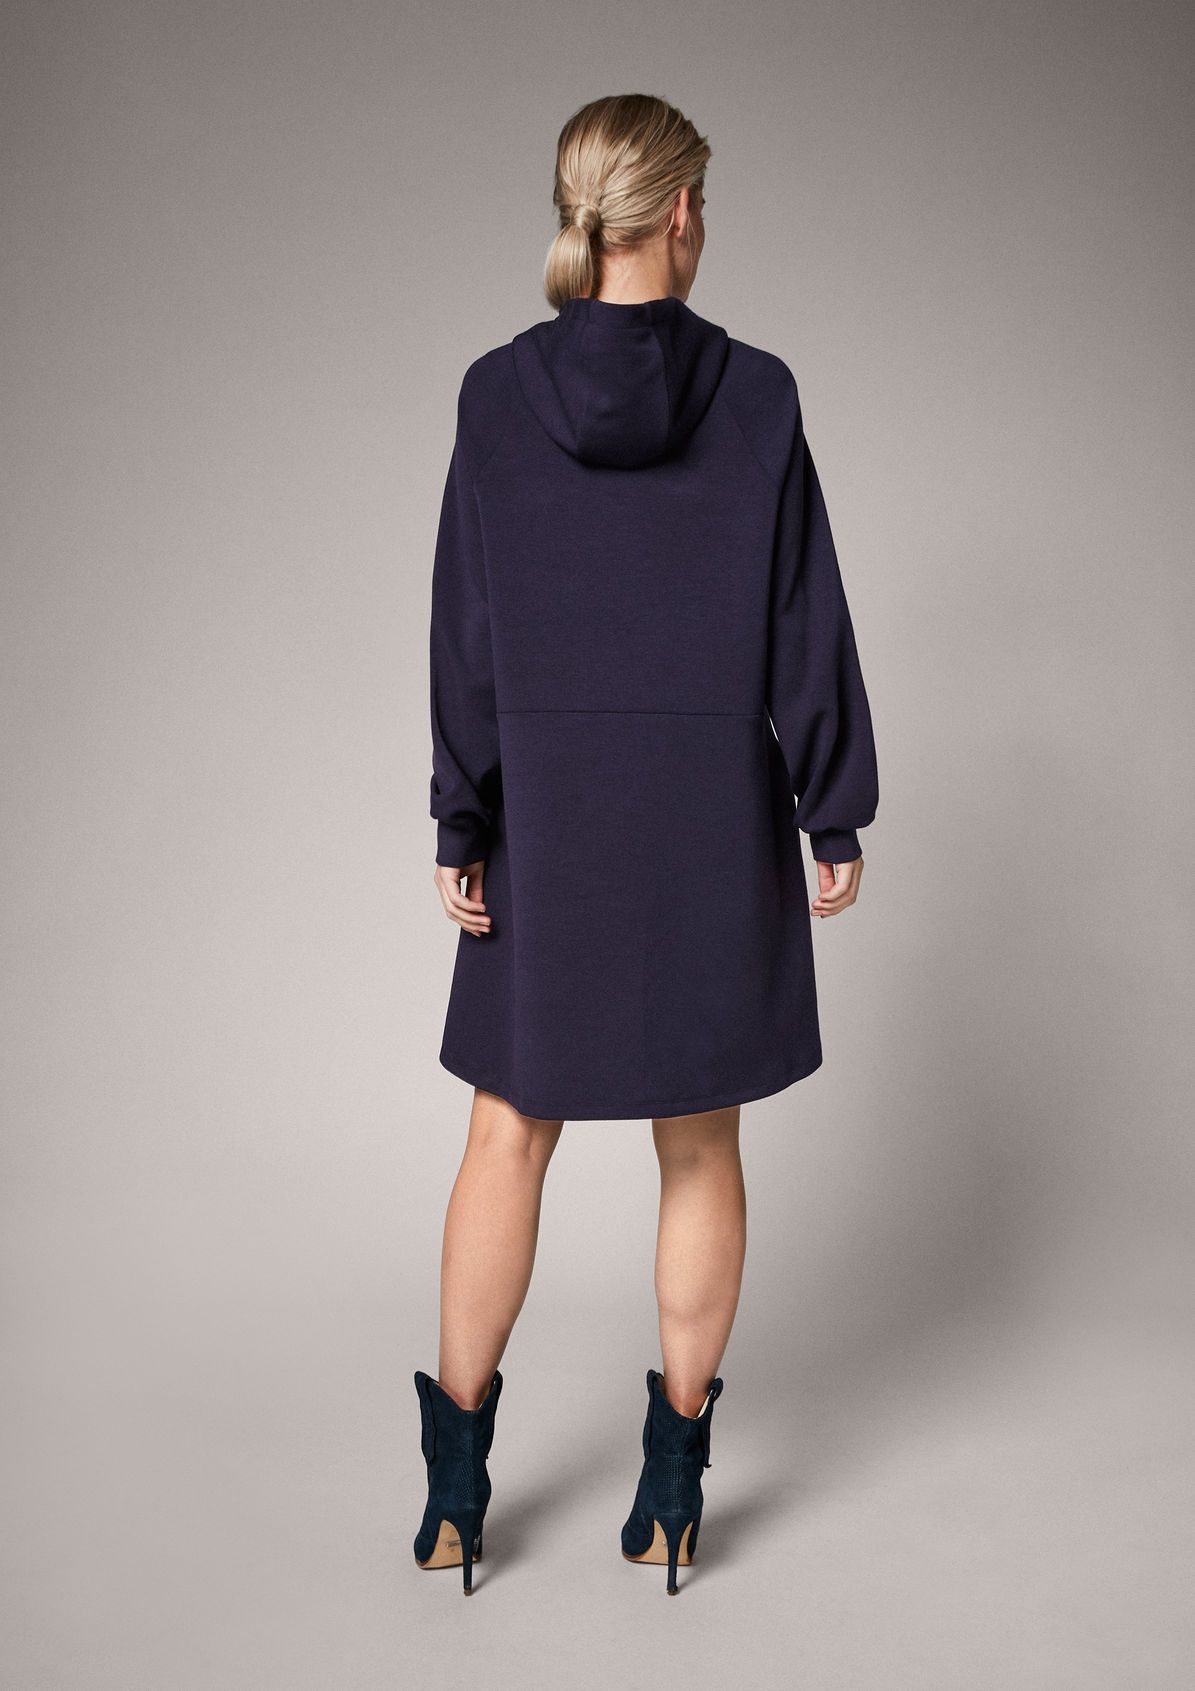 Hooded dress from comma